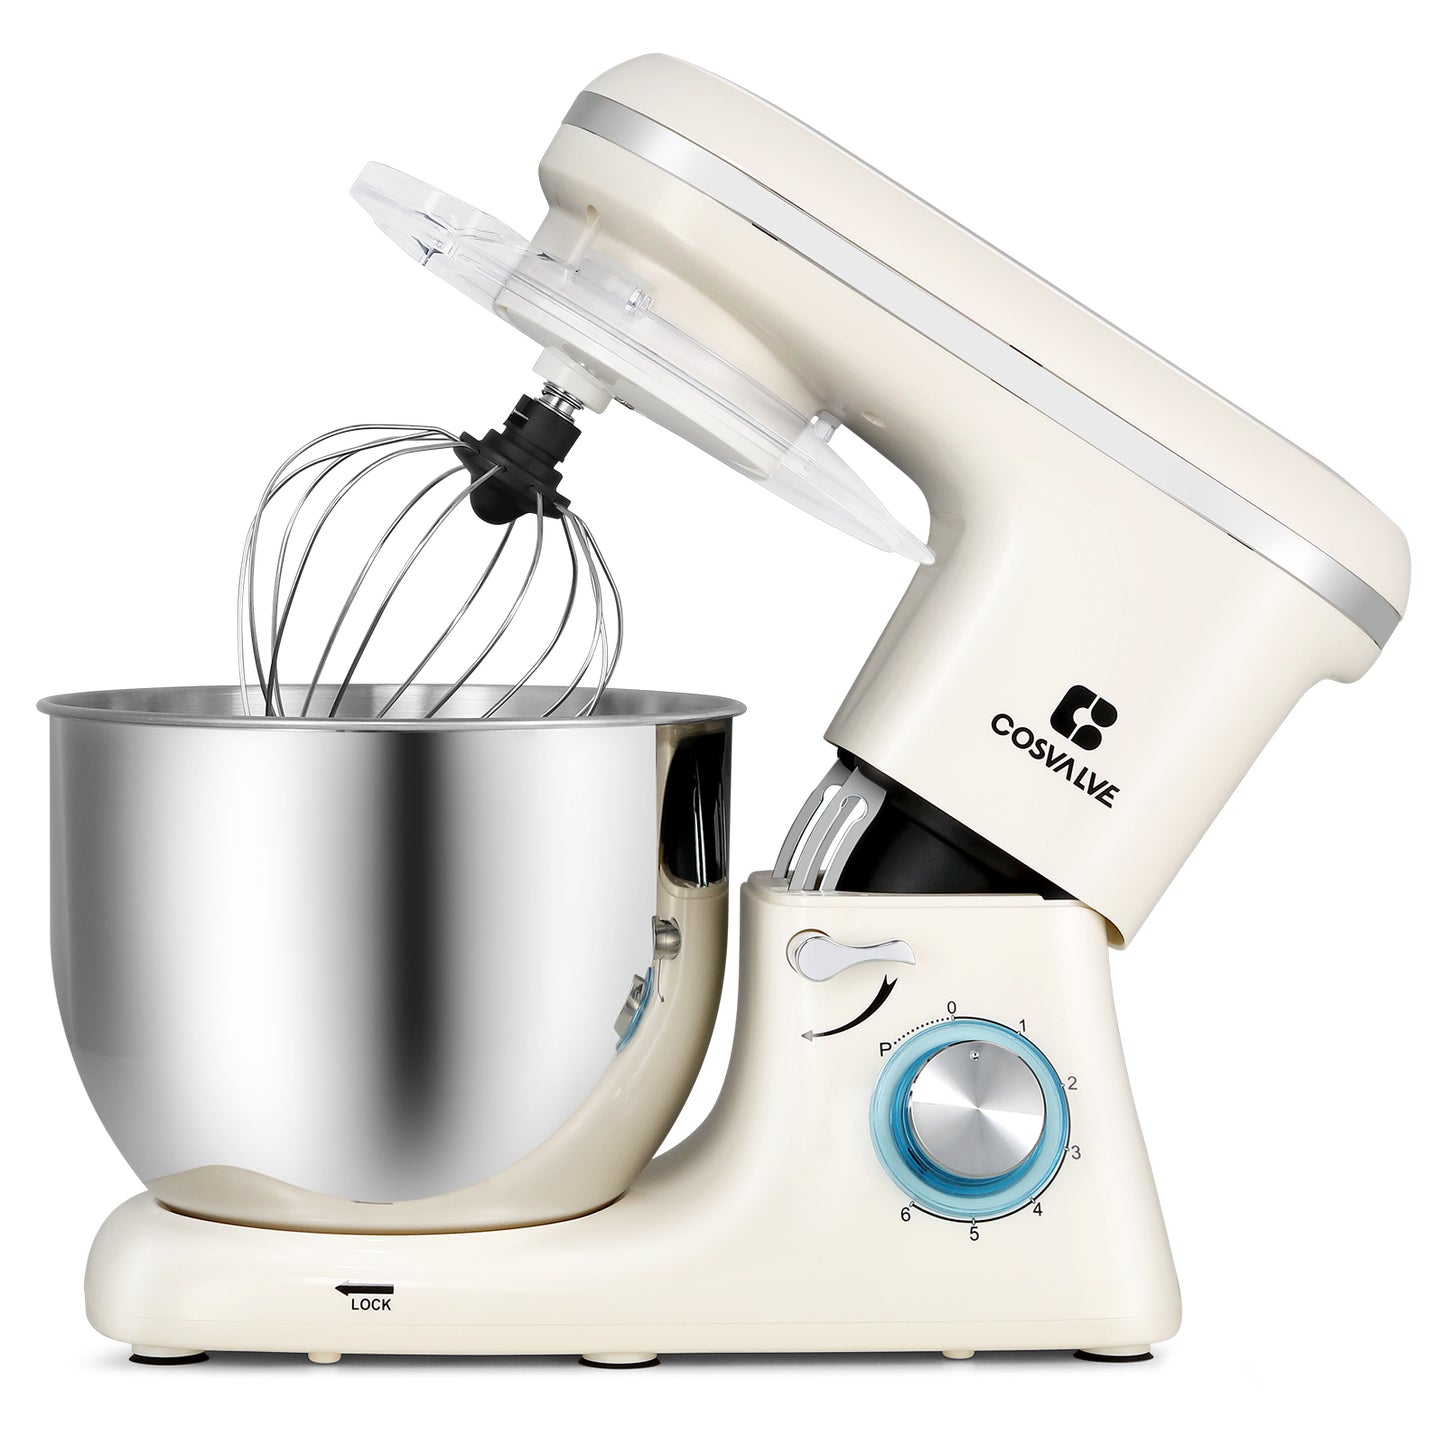 660W High Performance Stand Mixer White